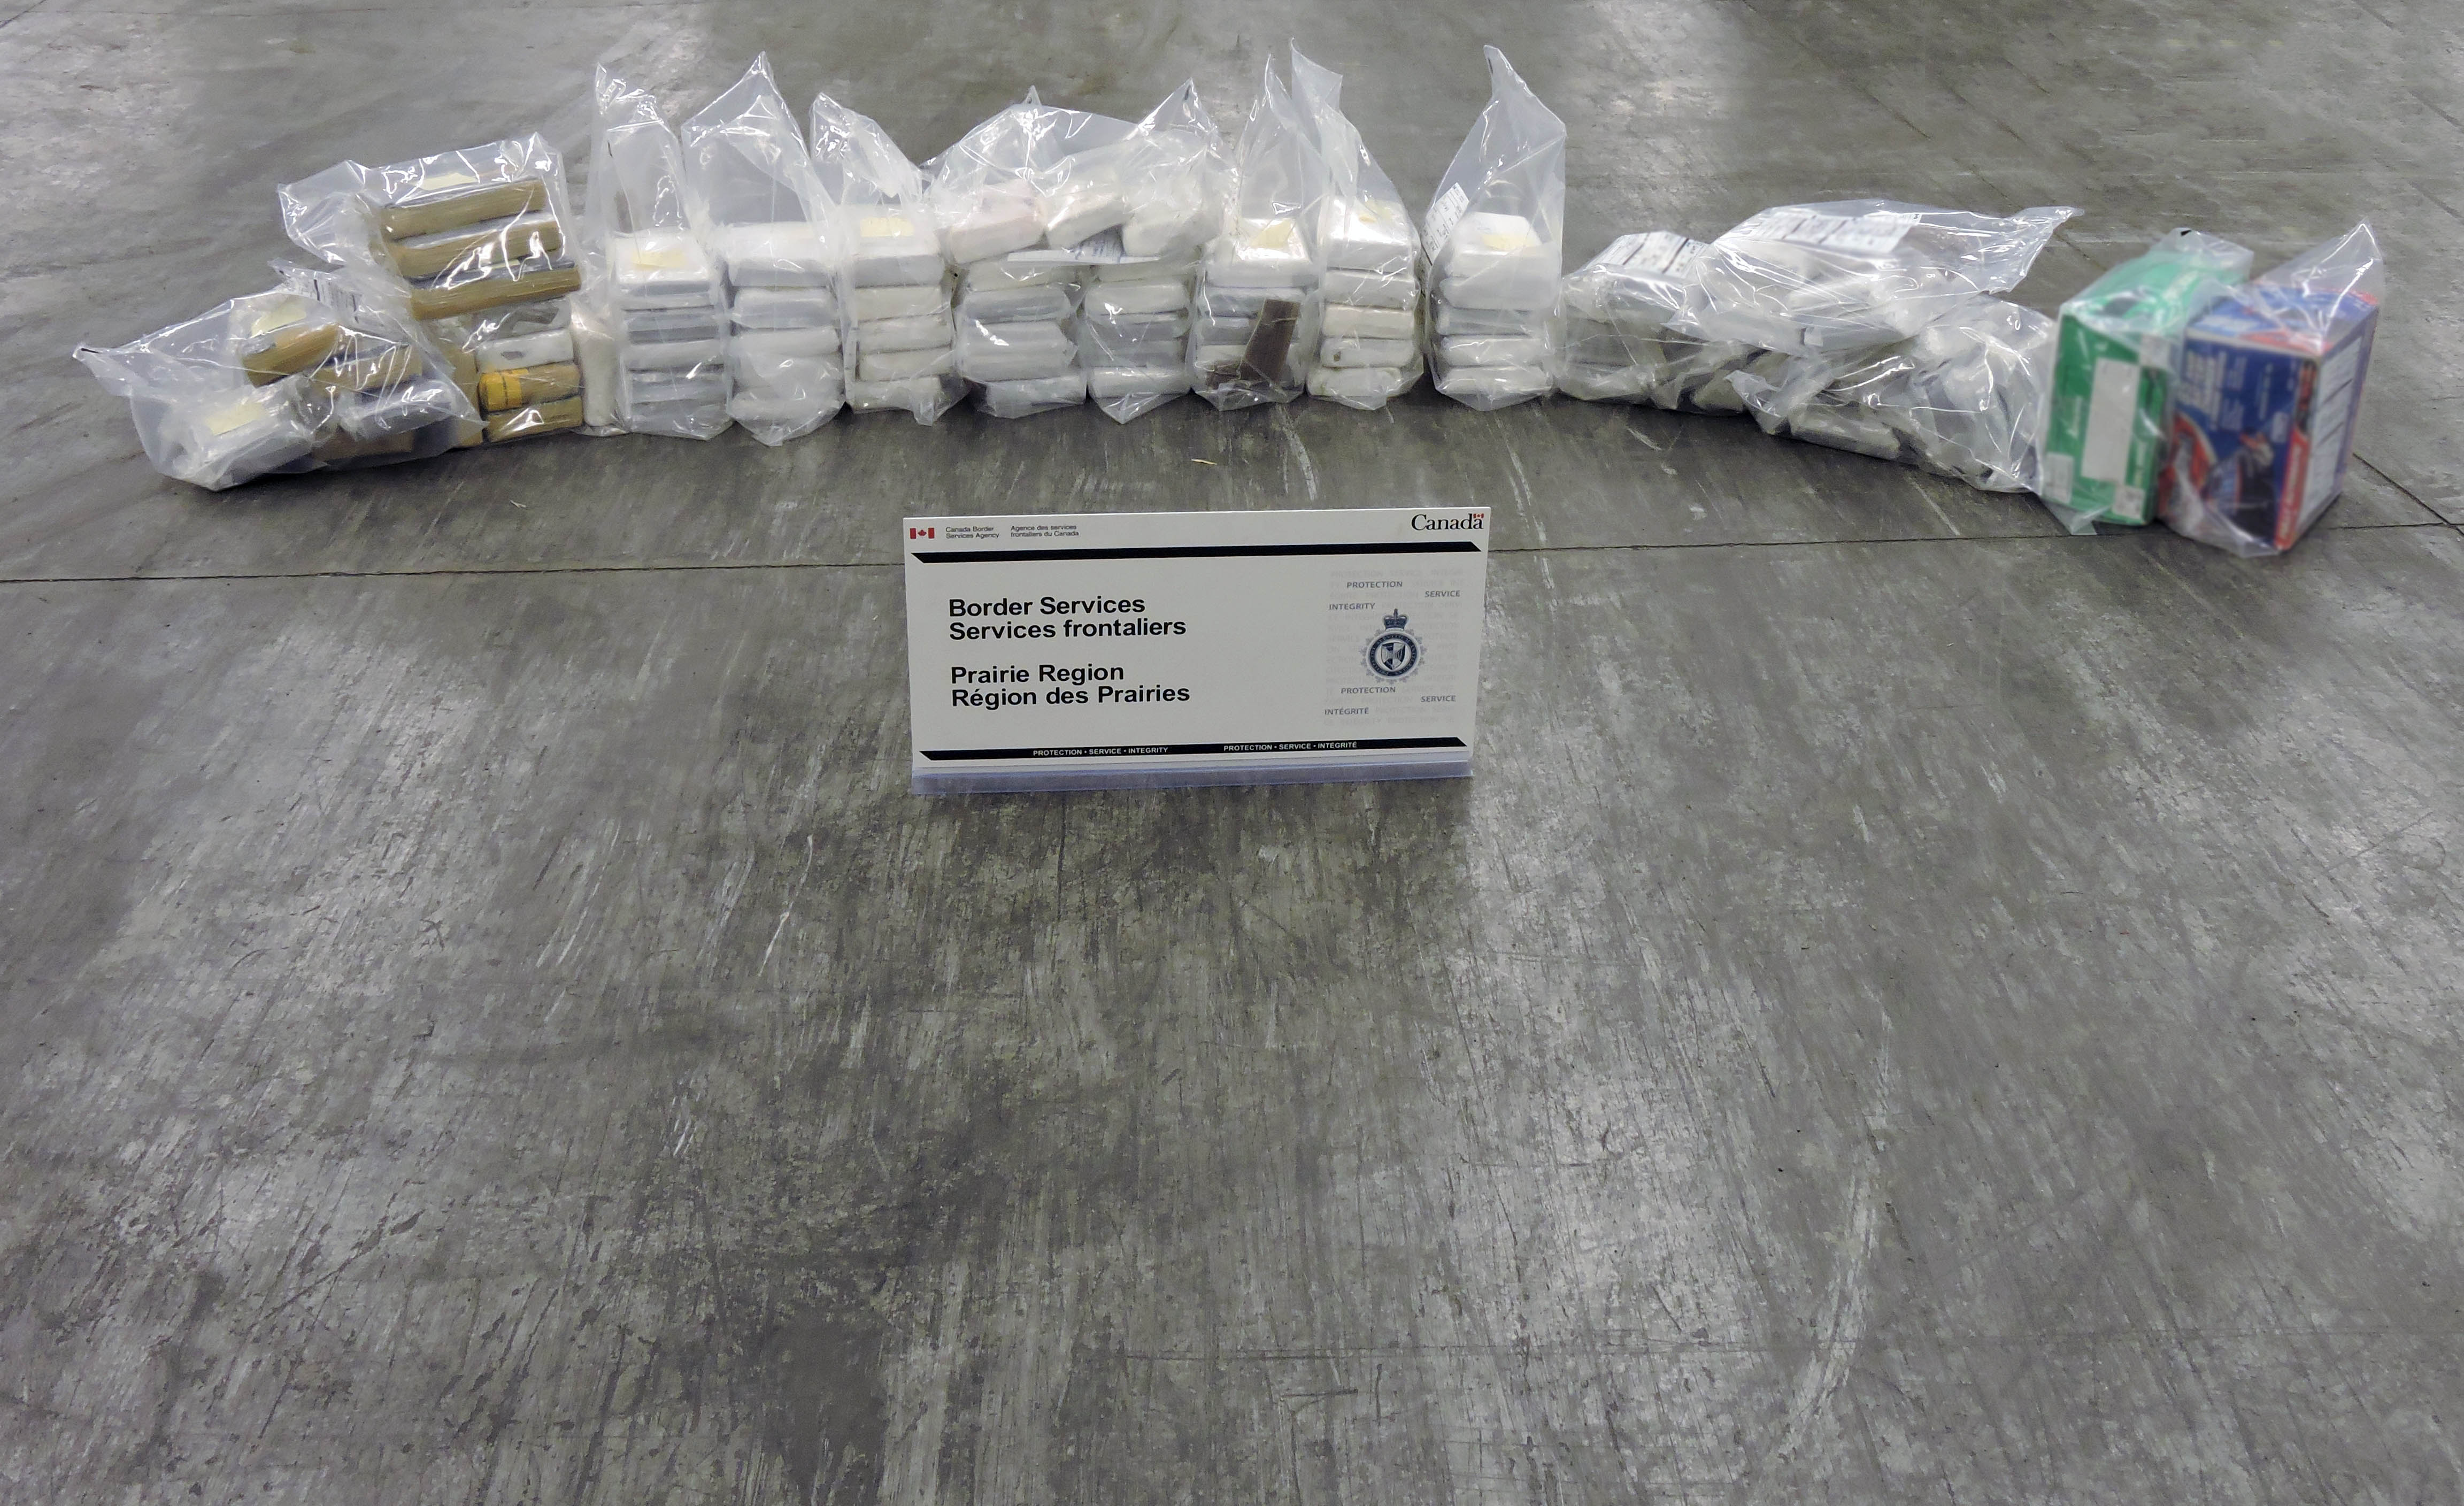 83 packages of cocaine seized October 10, 2016. 